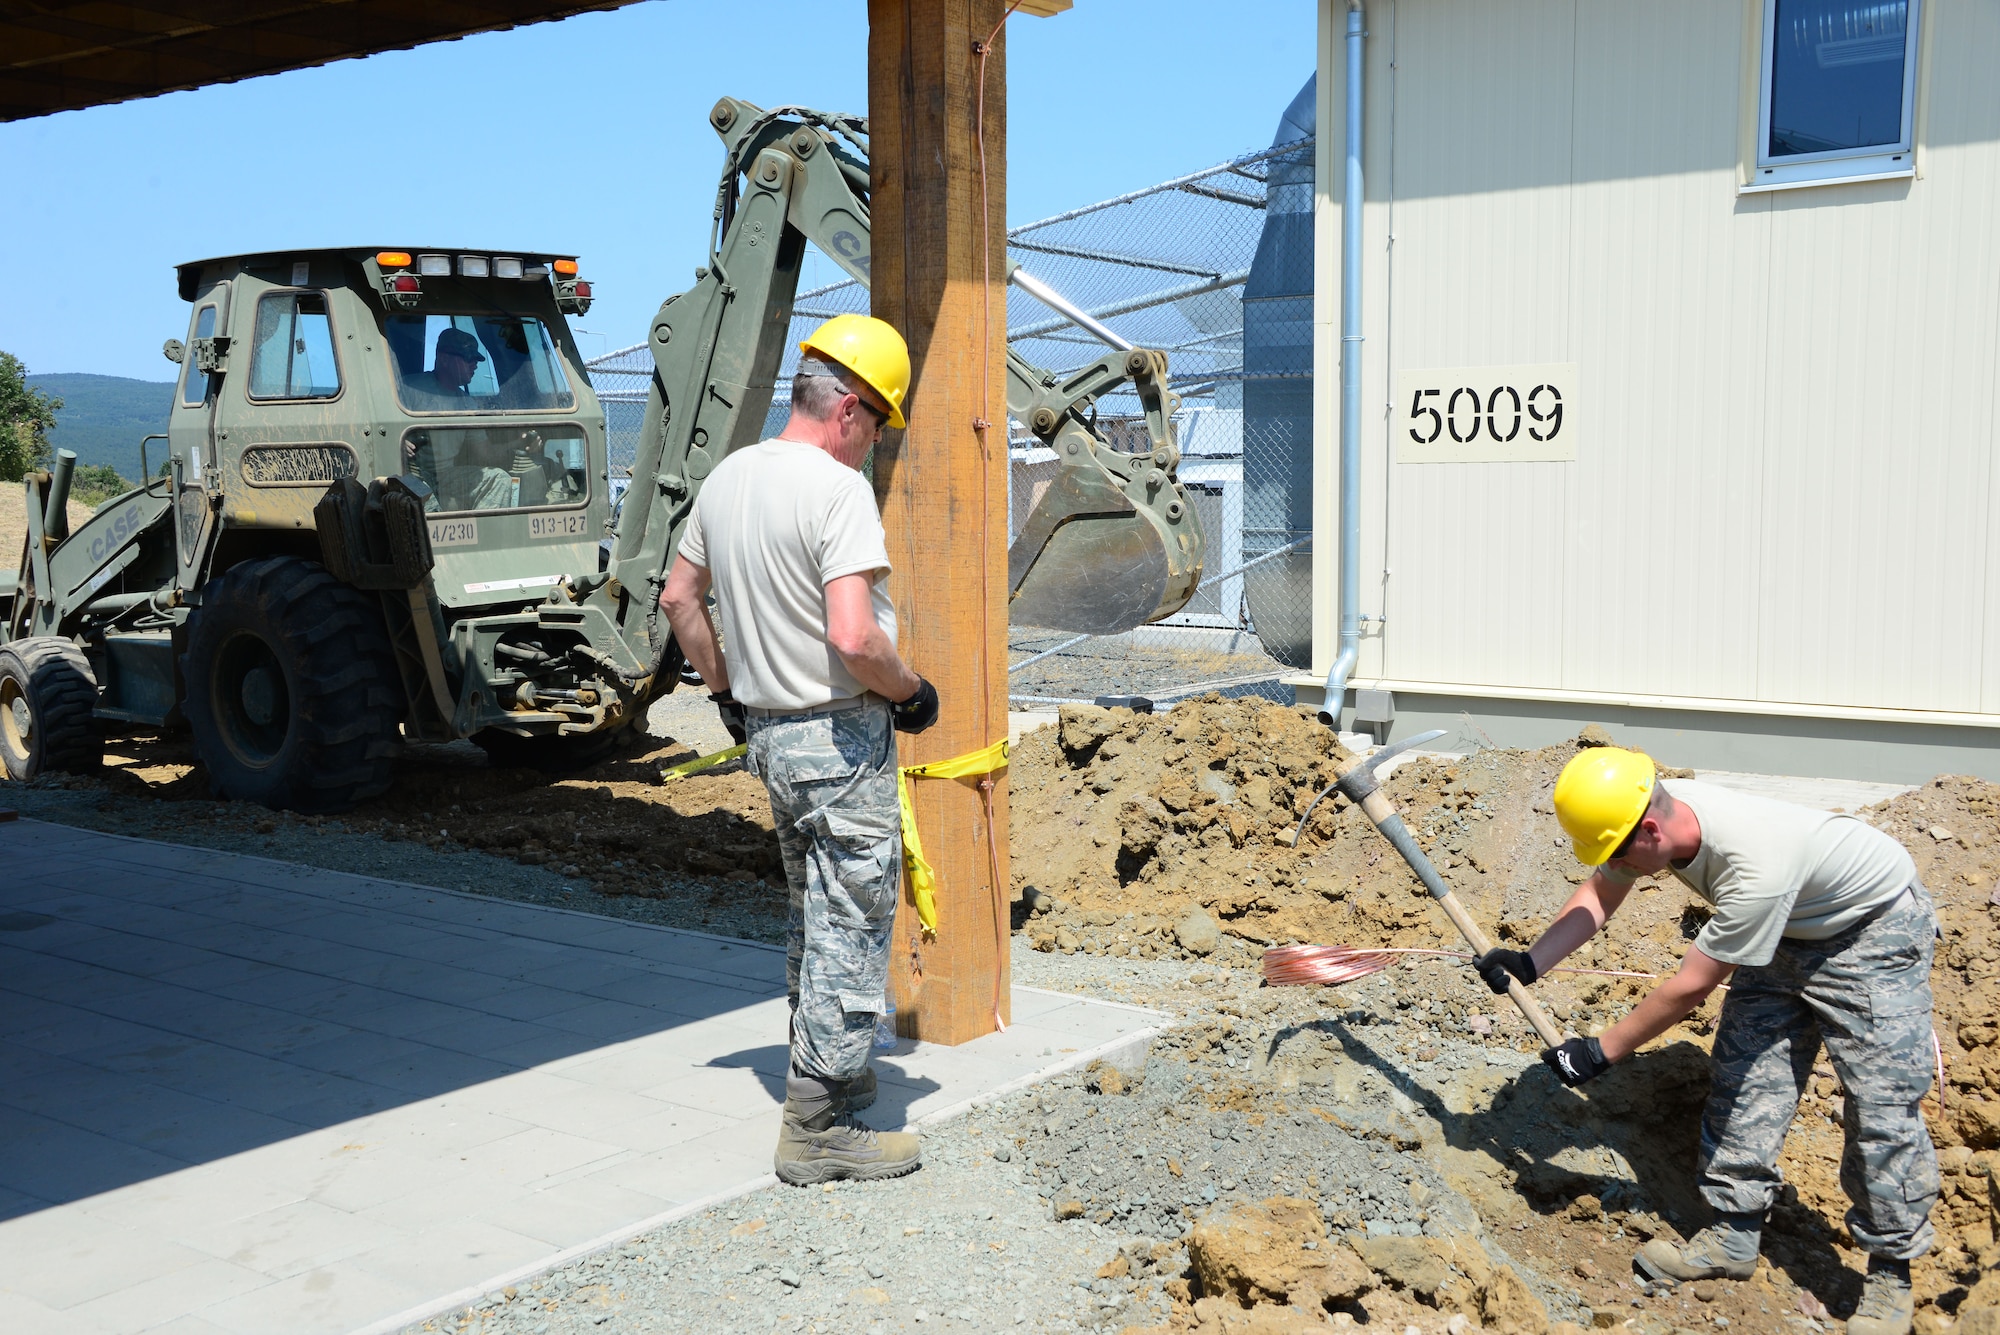 Airmen from the 118th Civil Engineer Squadron, Tennessee Air National Guard, install lightening protection at a pavilion Aug. 10, 2016, at Novo Selo Training Area, Bulgaria.  Tennessee National Guard Soldiers and Airmen were on rotations to complete thier portions of projects as part of Operation Resolute Castle 16, an ongoing operation of military construction to build up Eastern European base infrastructure and help strengthen ties between Tennessee's state partnership with Bulgaria. (U.S. Air National Guard photo by Master Sgt. Kendra M. Owenby, 134 ARW Public Affairs)